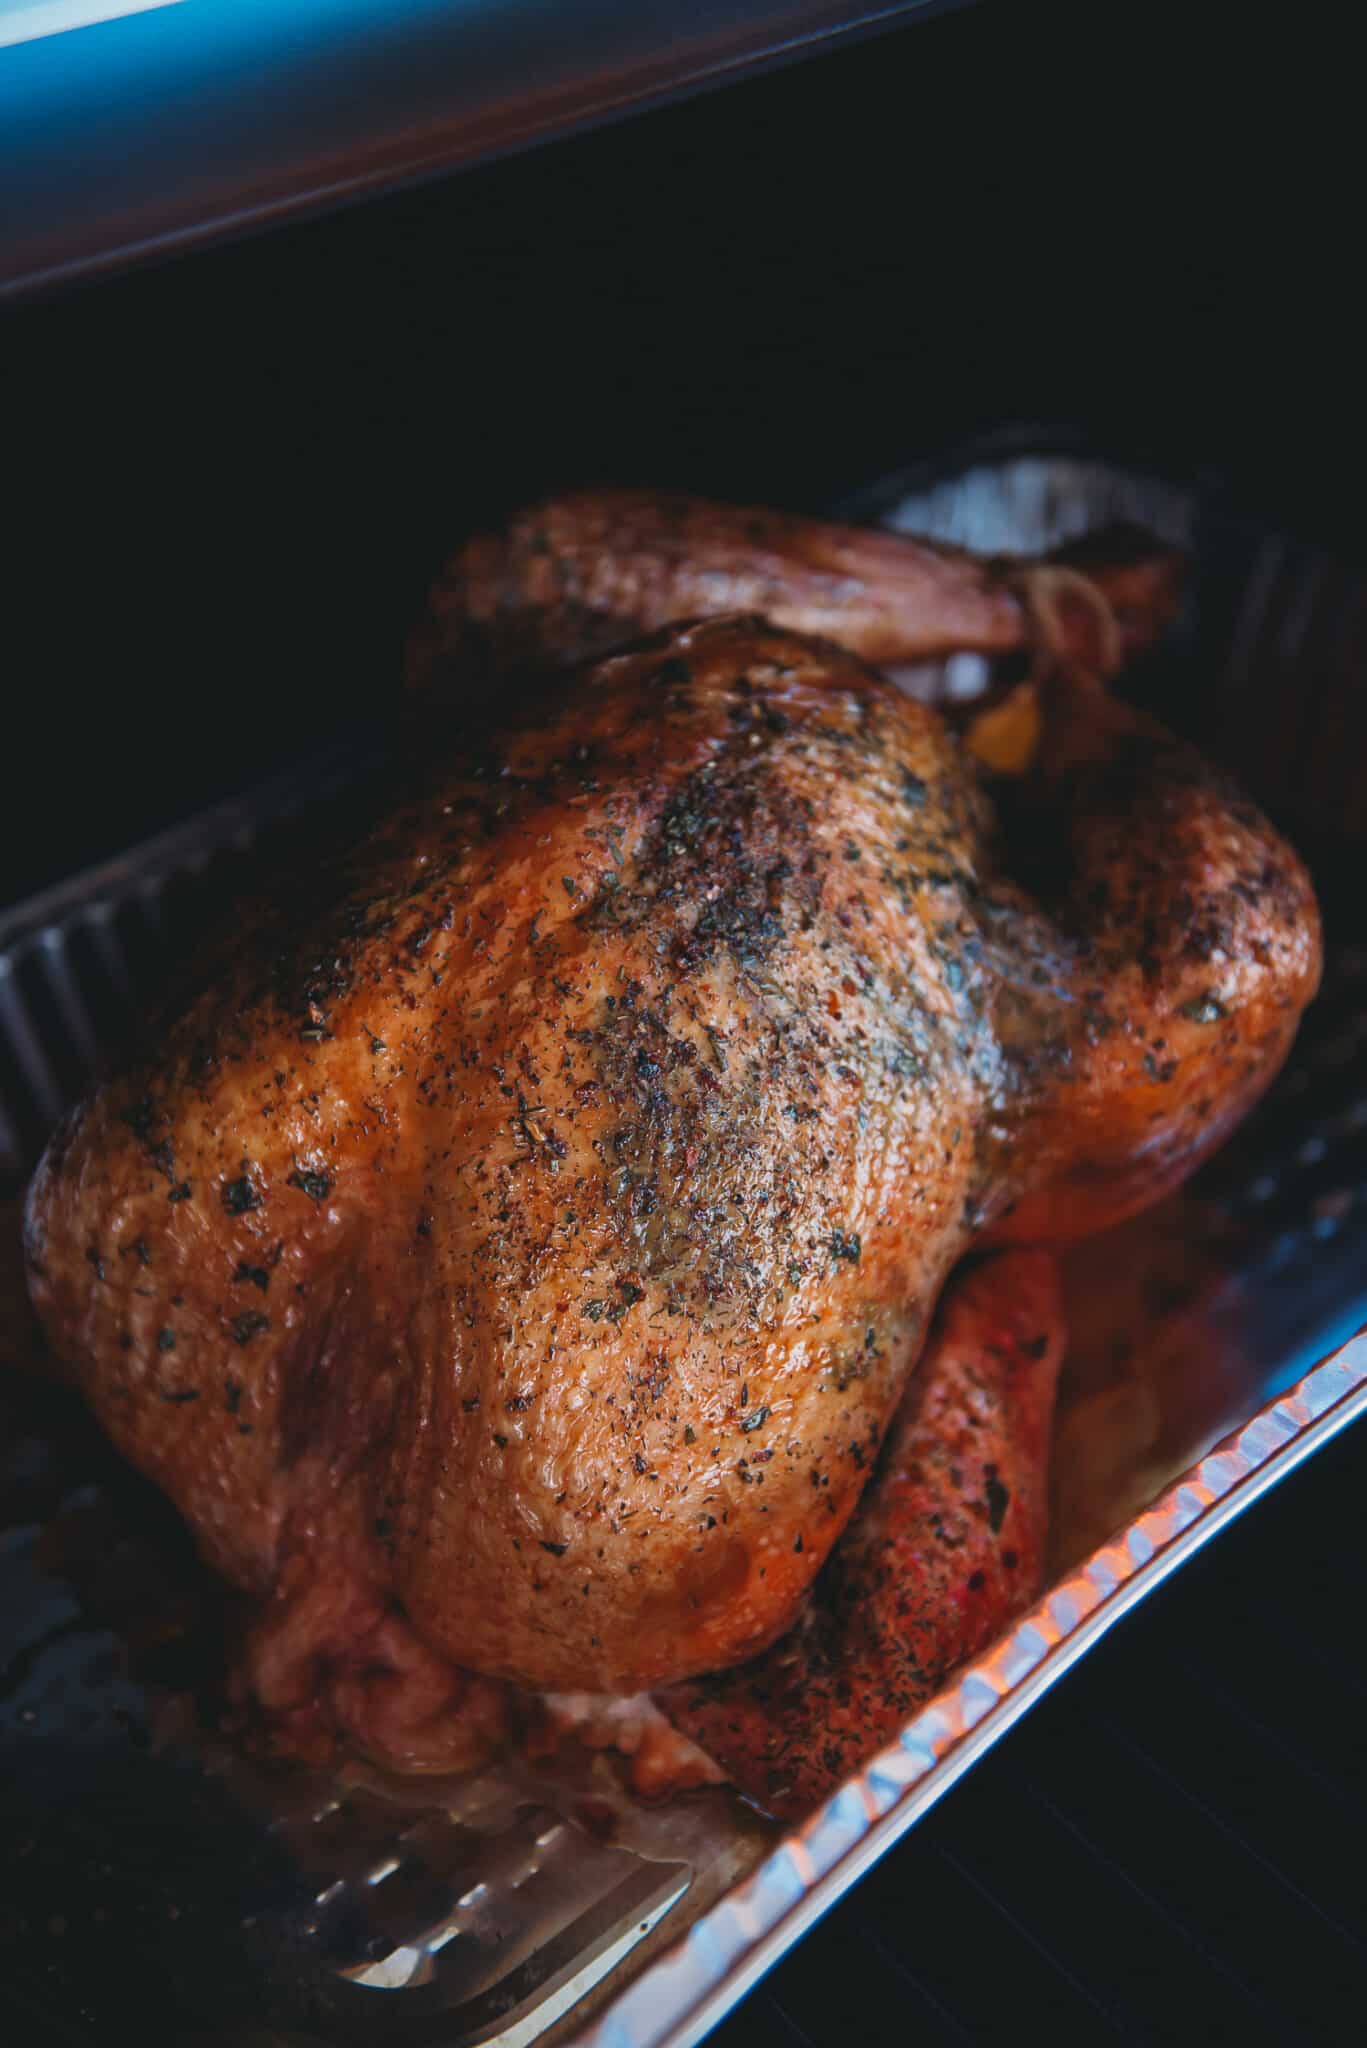 Turkey smoking in a grill, almost to completion showing golden brown skin. 